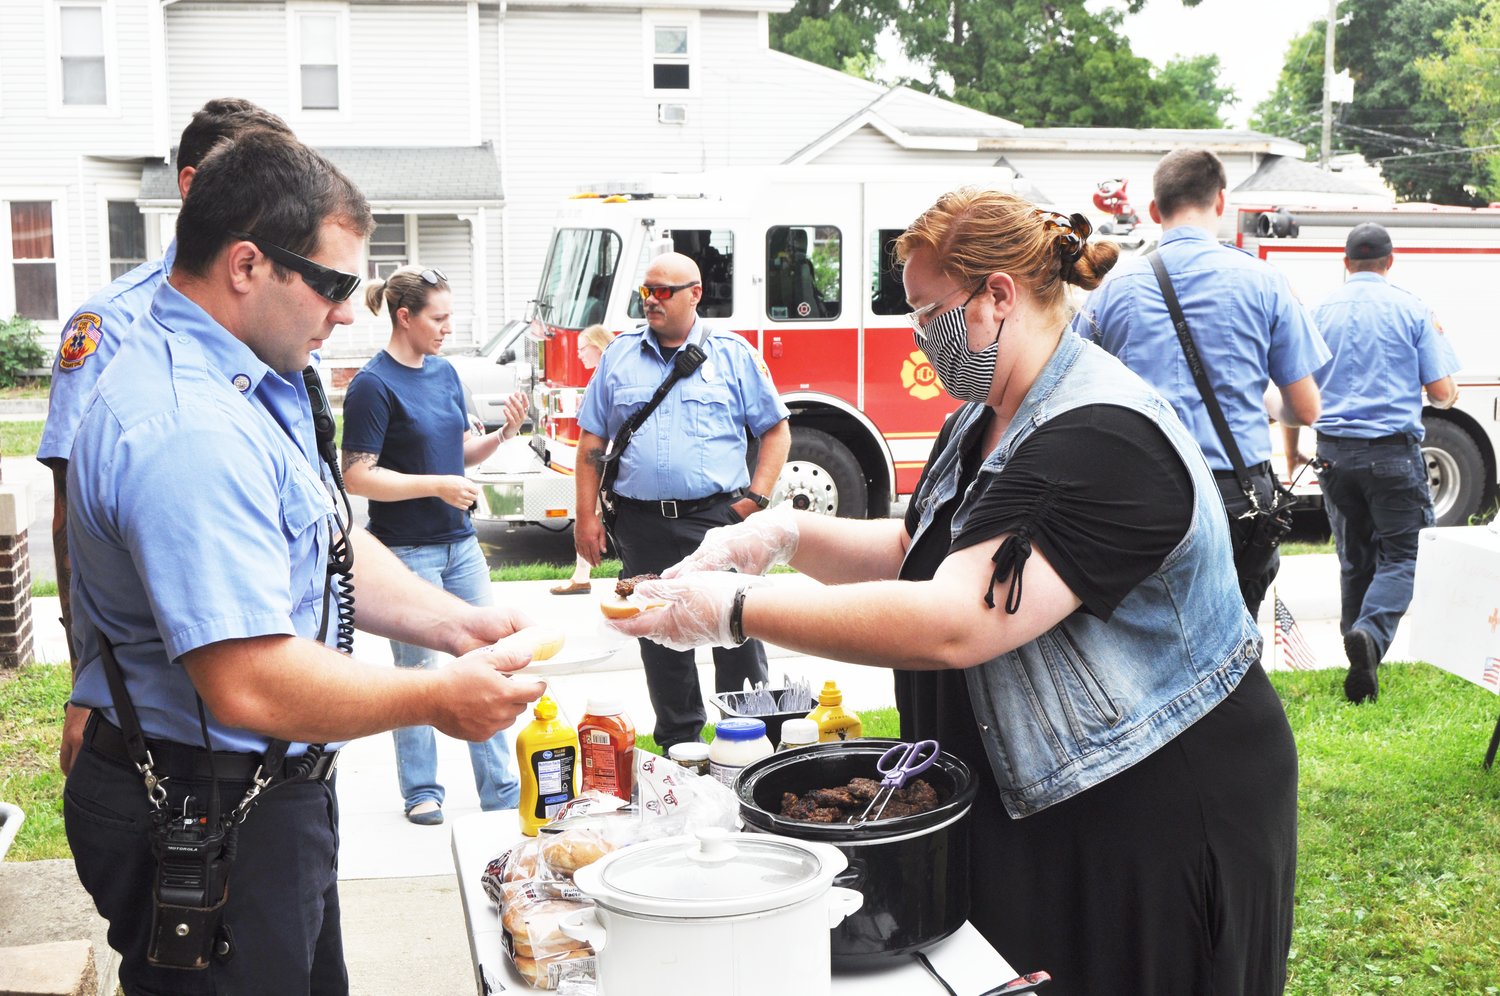 Praise Sharp serves a hamburger to Crawfordsville firefighter/EMT Cody Haslam Saturday at The Pentecostals of Crawfordsville. The church served free food to first responders and military personnel to recognize the 19th anniversary of the Sept. 11 attacks.